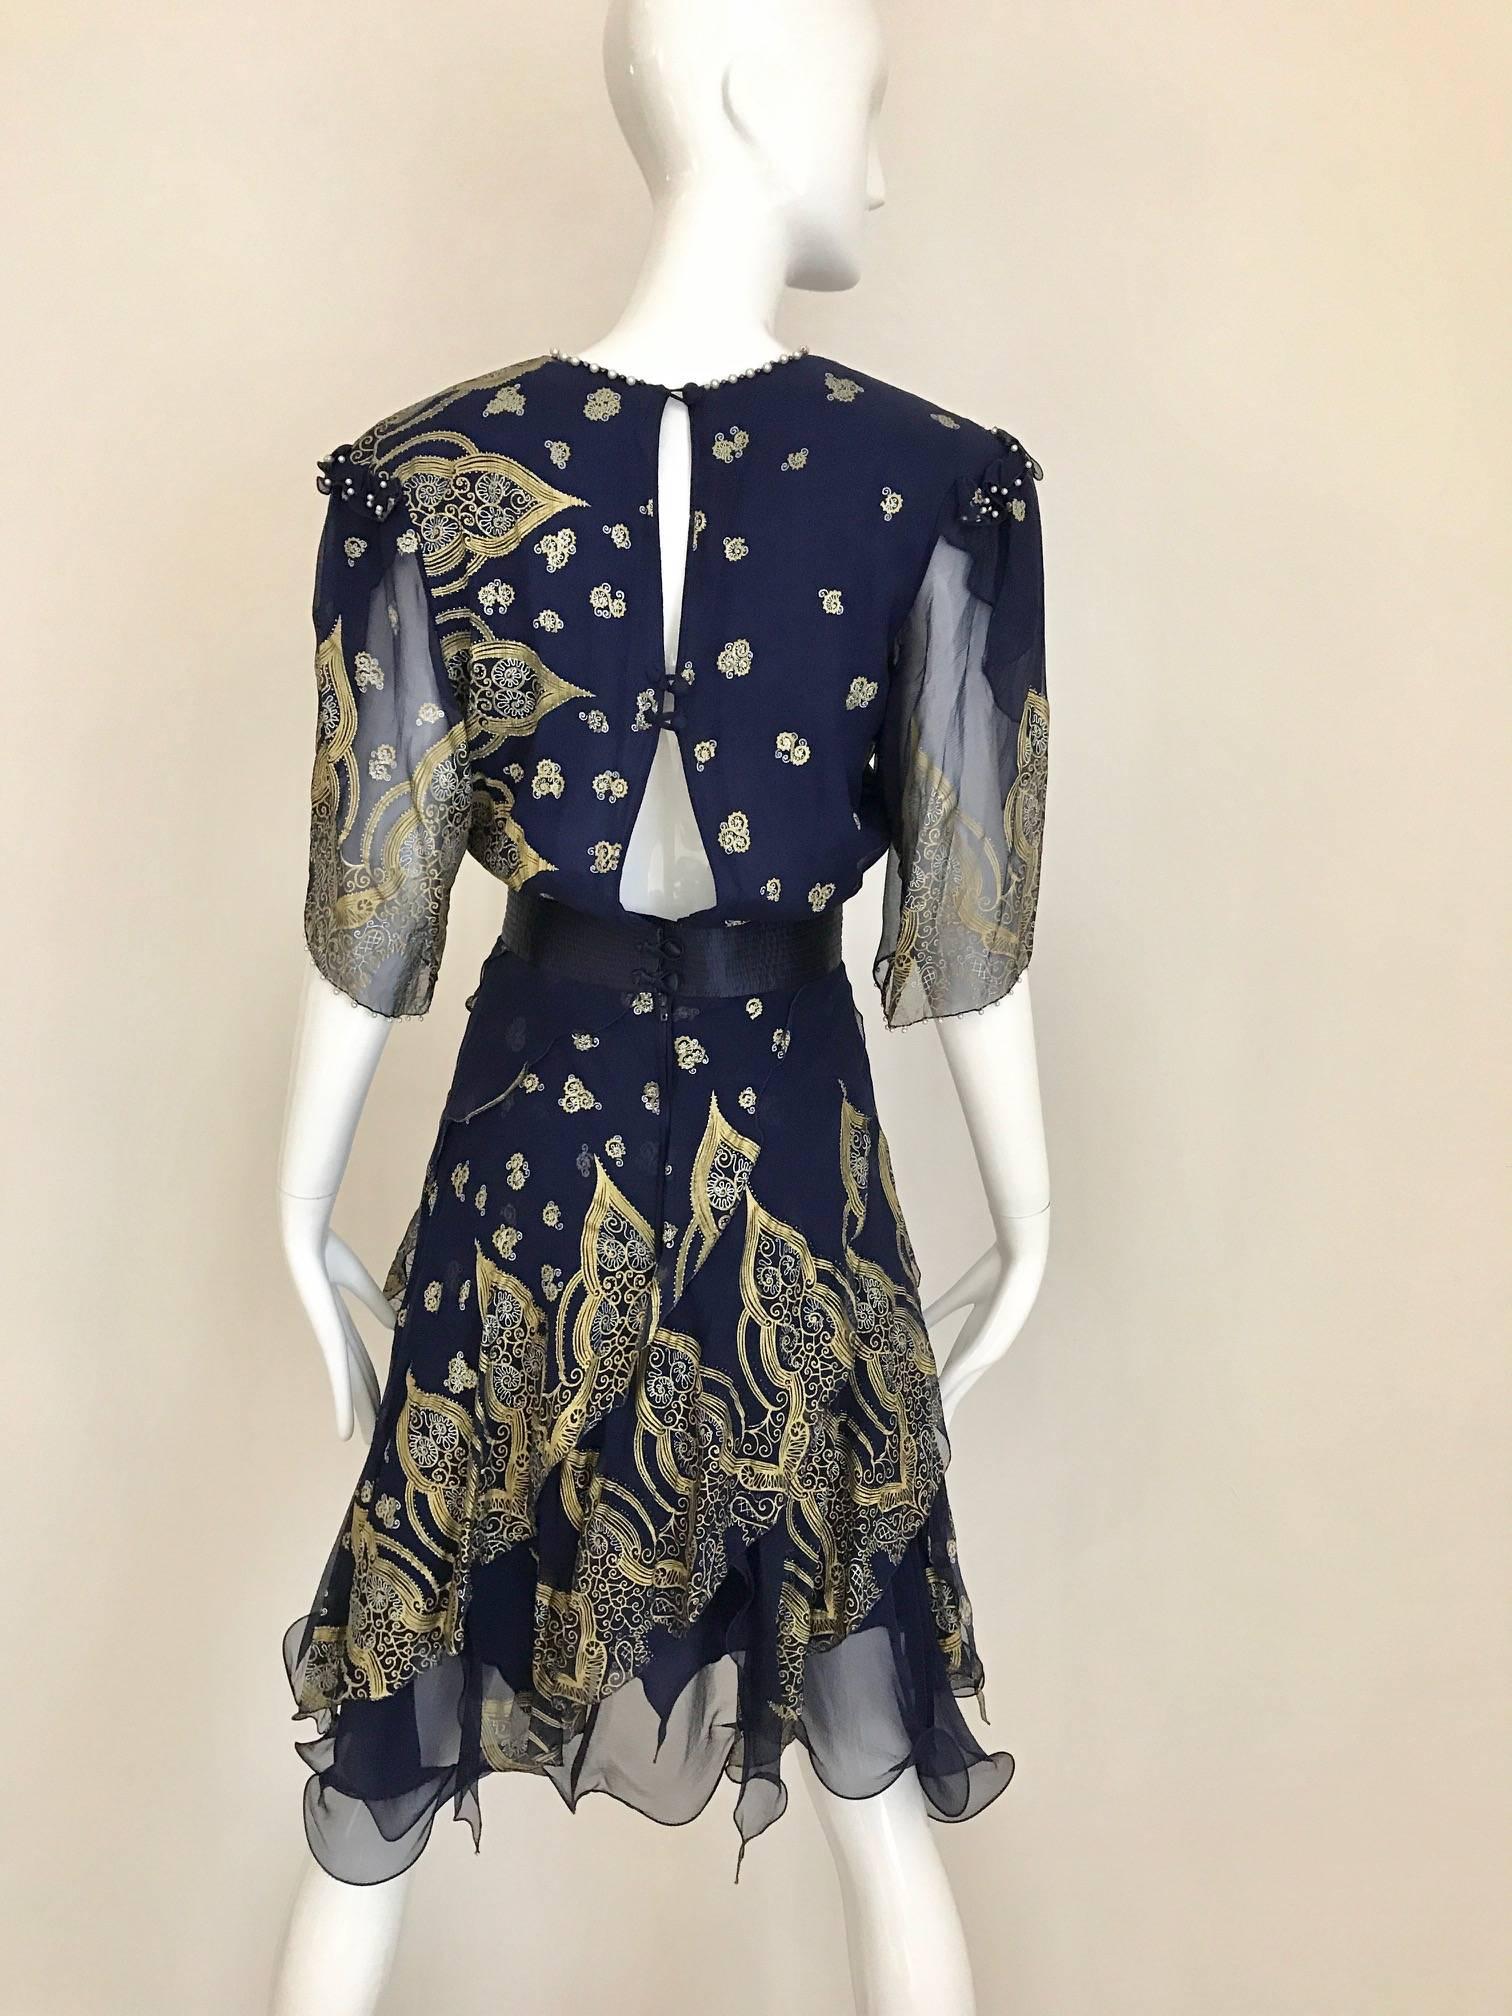 This 1980s blue Zandra Rhodes silk chiffon cocktail dress is highlighted with a gold and silver Indian print etched with sequins. The collar, shoulders and sleeve cuffs are edged with small pearls. The lower portion of the dress has a multi-layered